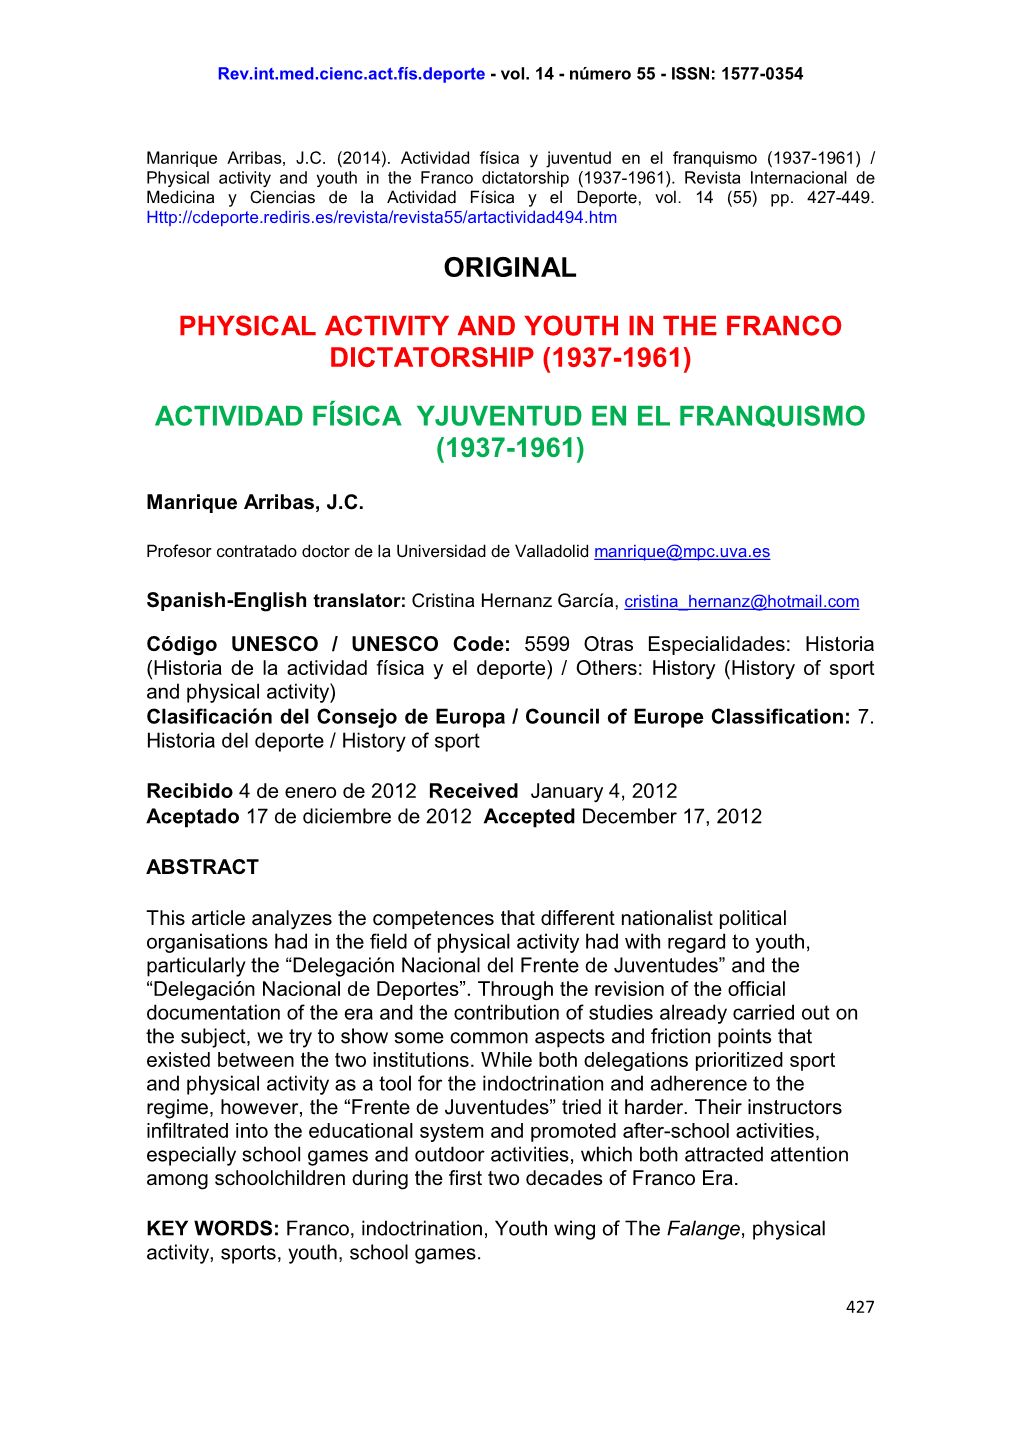 Physical Activity and Youth in the Franco Dictatorship (1937-1961)